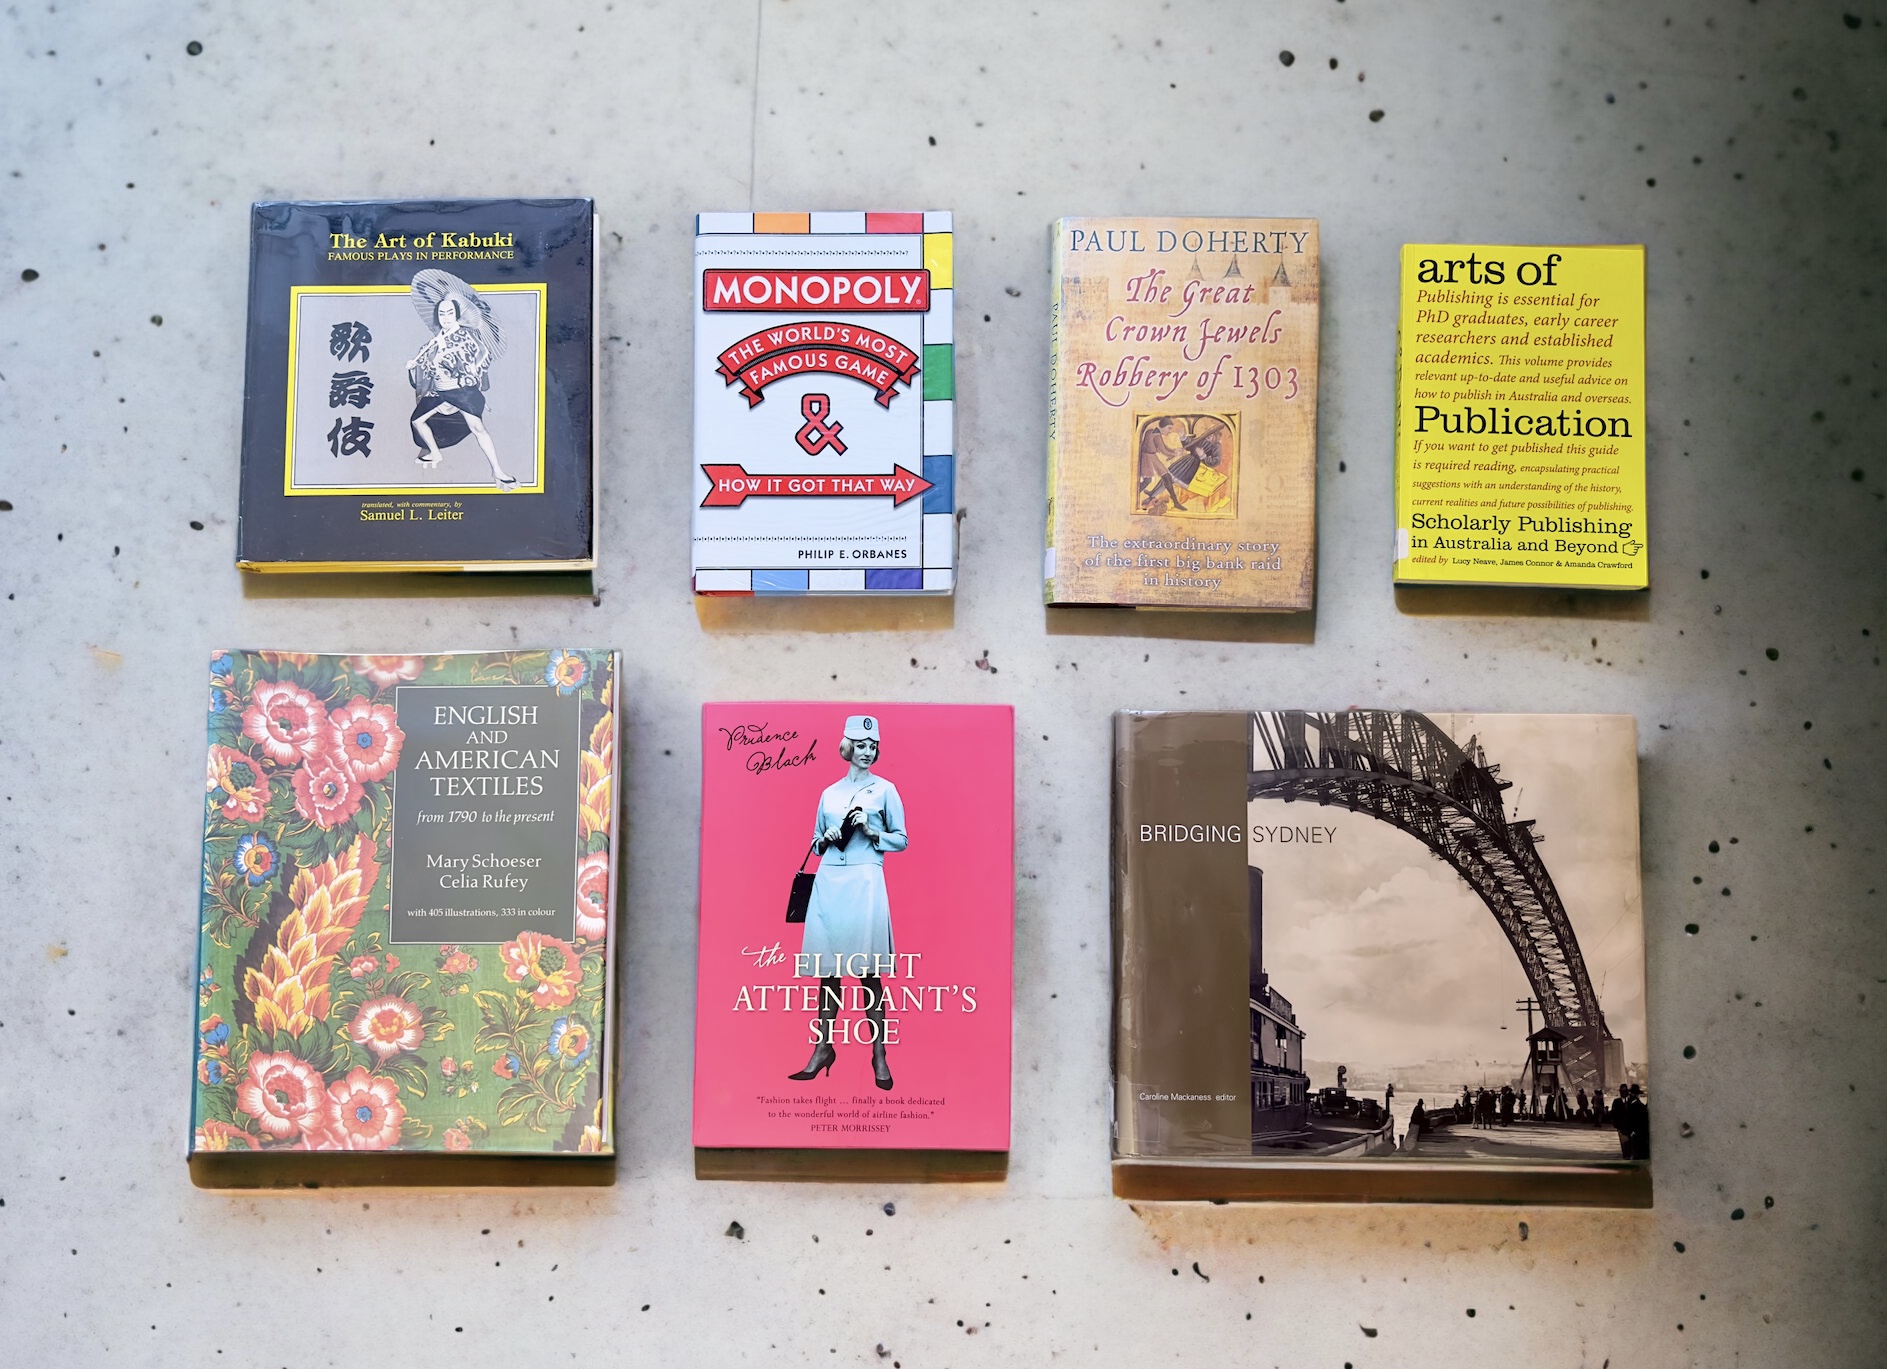 Selection of books on a concrete surface.